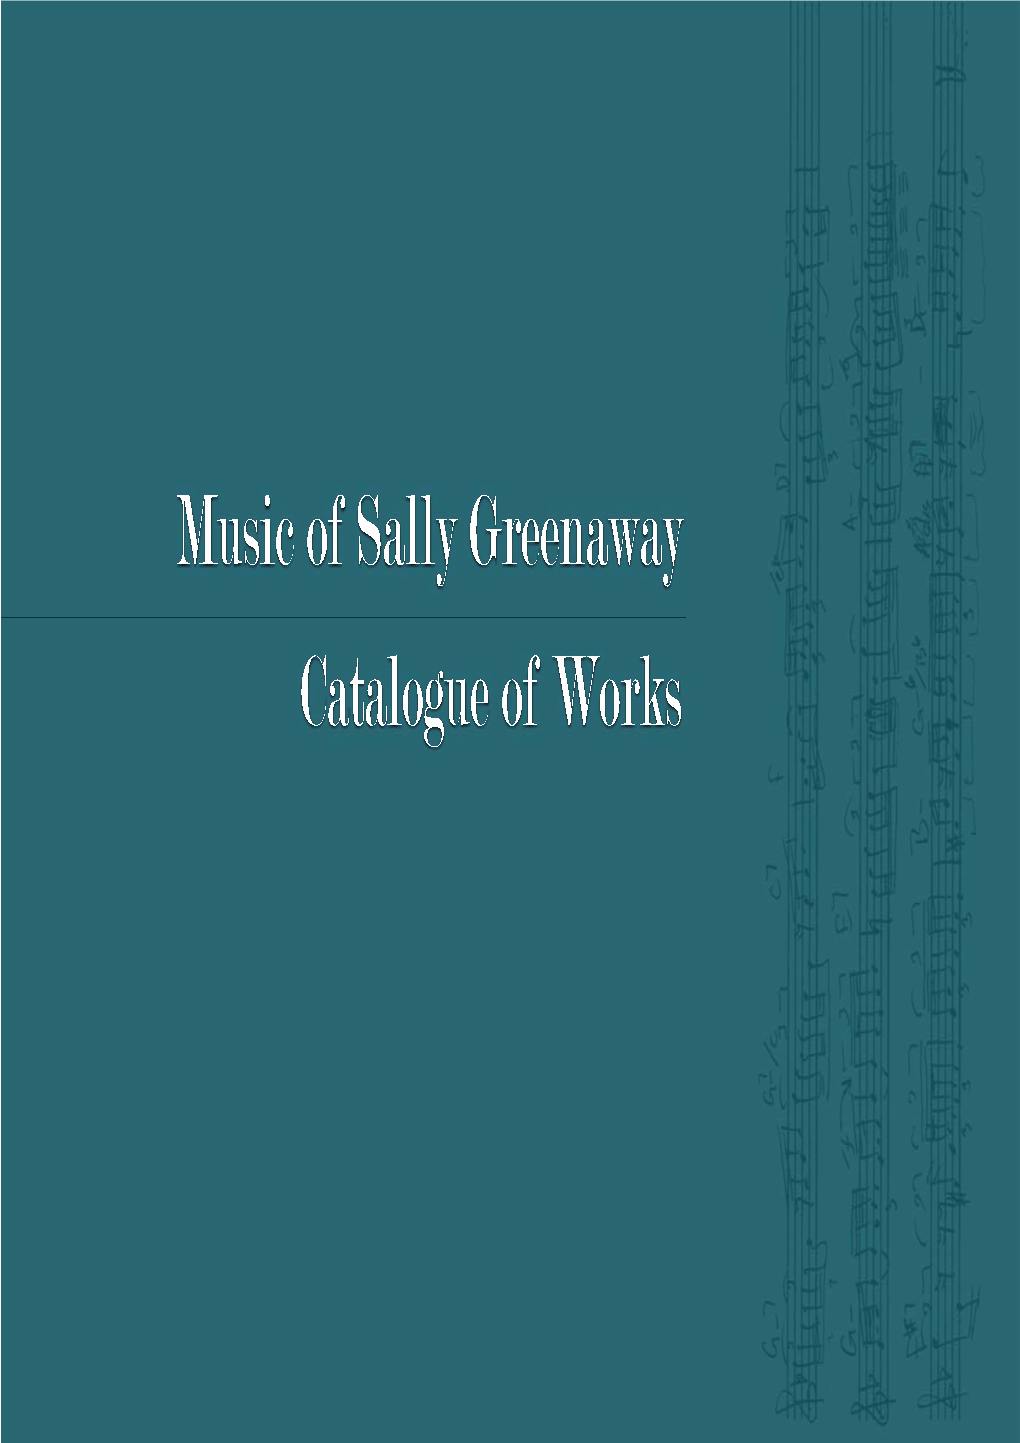 Catalogue of Works by Sally Greenaway ‹‘‰”ƒ’Š›ǢƒŽŽ› ”‡‡ƒ™ƒ›